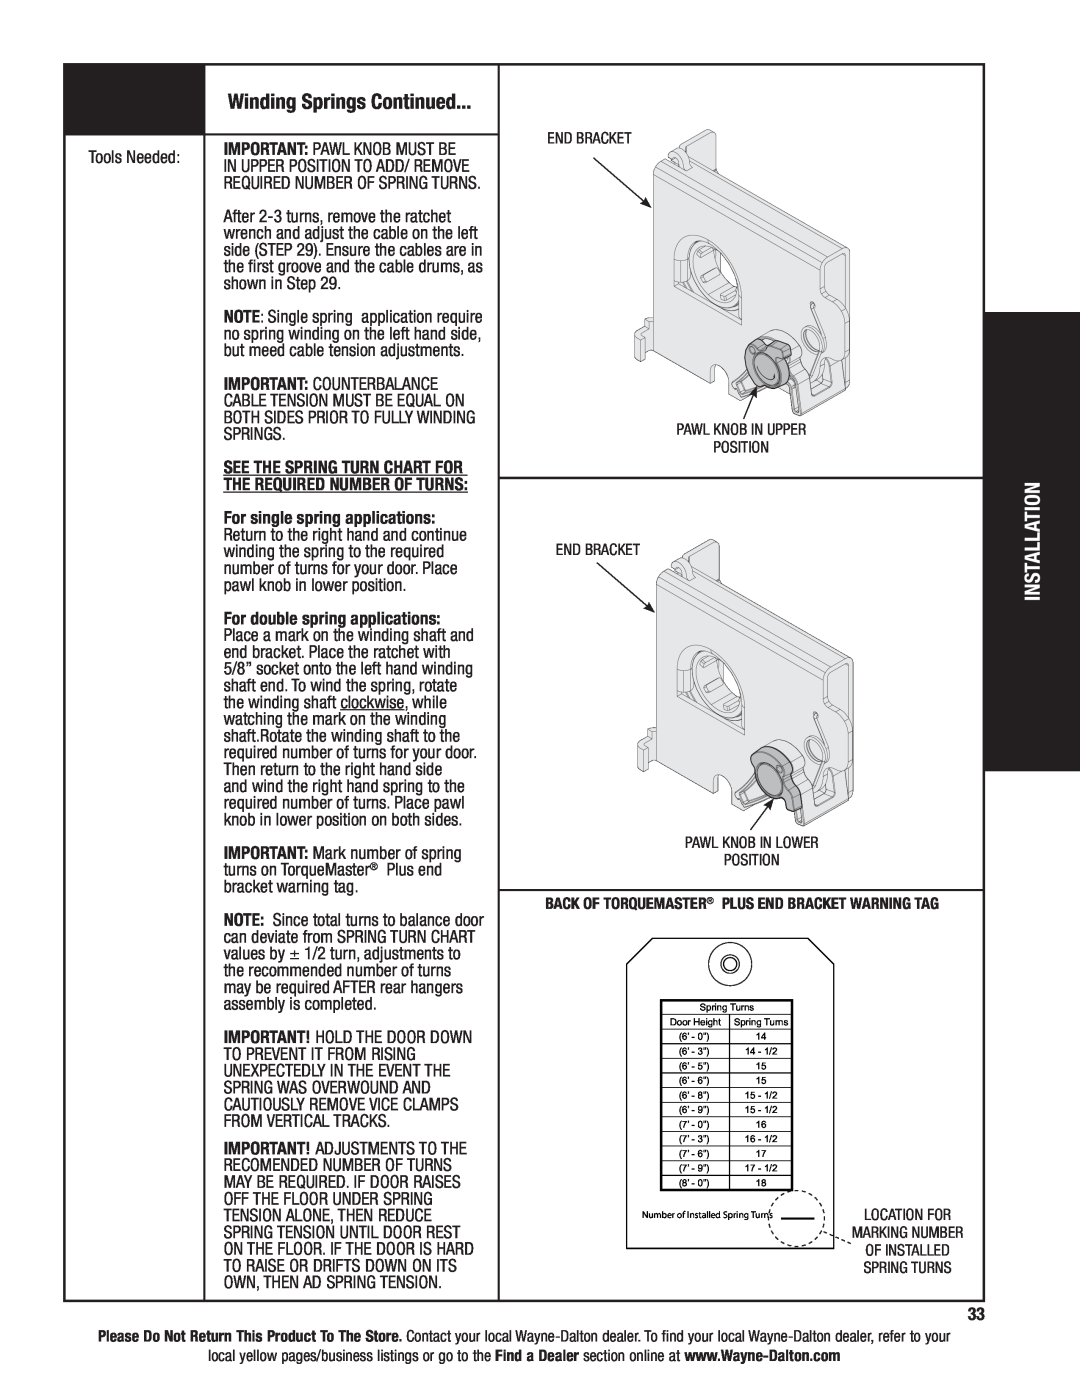 Wayne-Dalton AND 9600, 9400 installation instructions Winding Springs Continued 